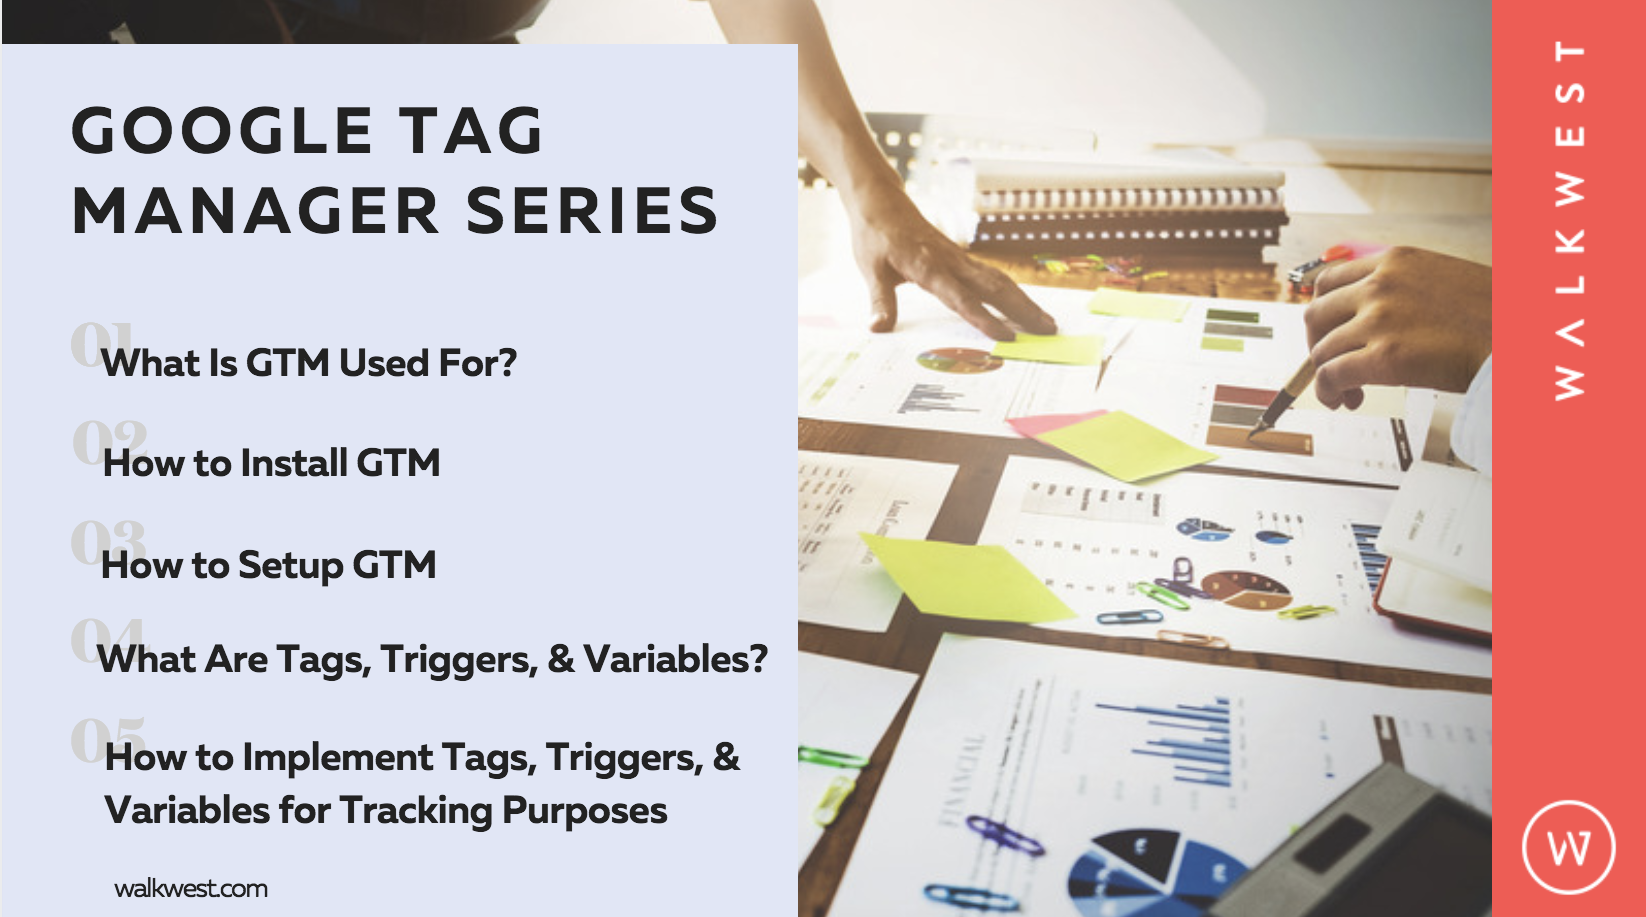 Walk West Blog Series How to Use Google Tag Manager: Setup, Event Tracking, and More